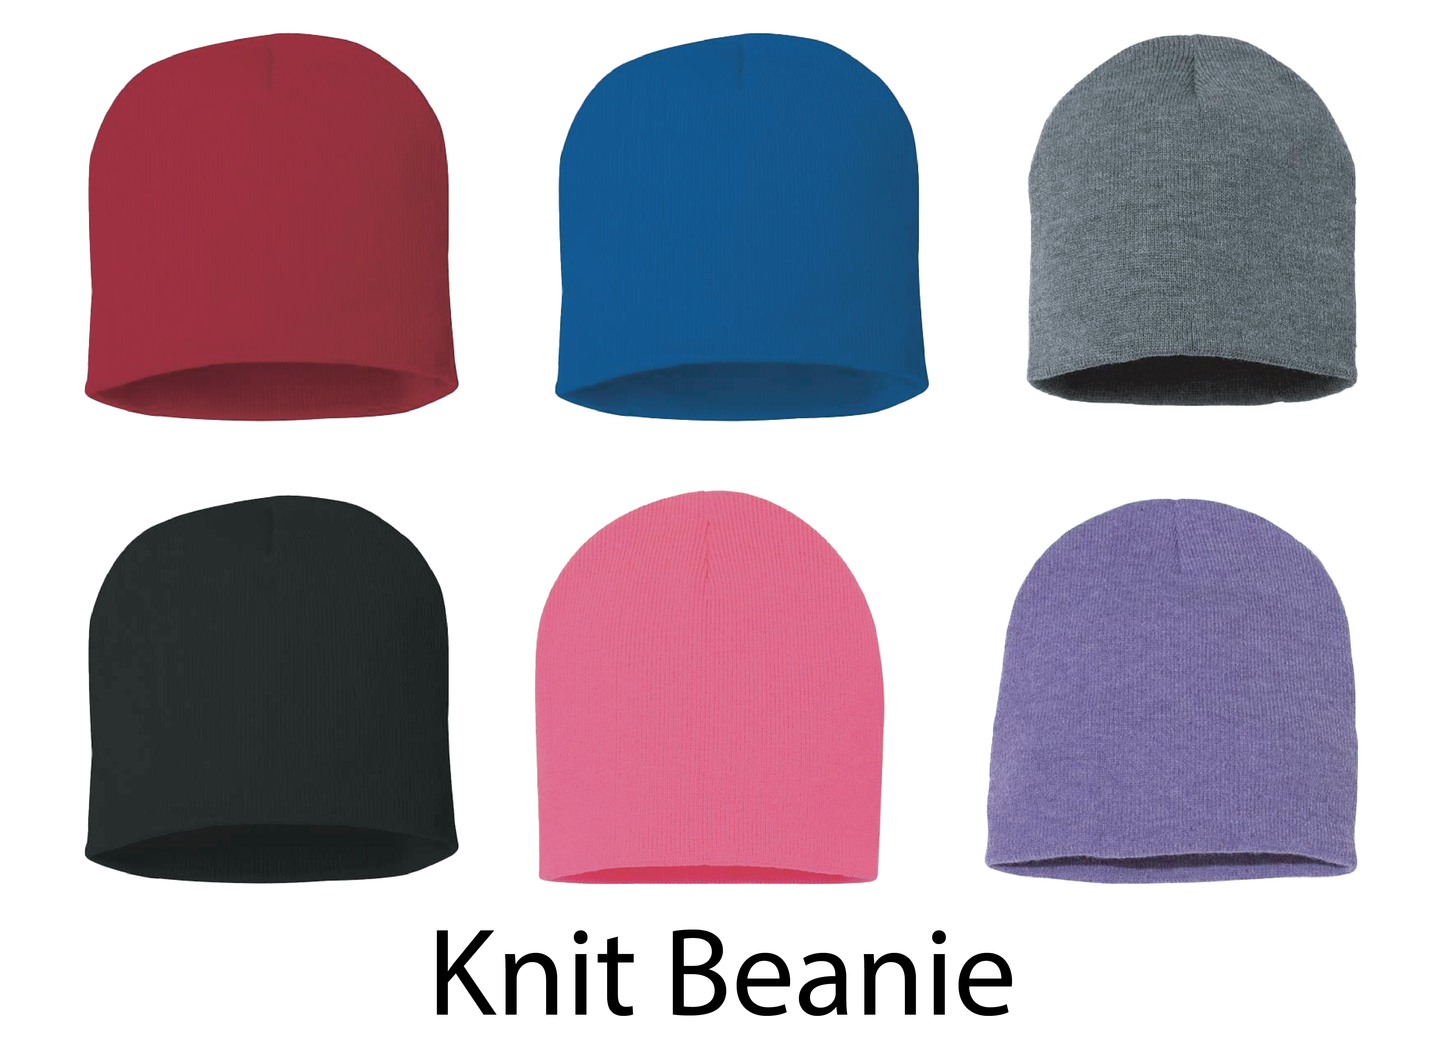 45 South Hat or Beanie - Available in Multiple Colors & Styles